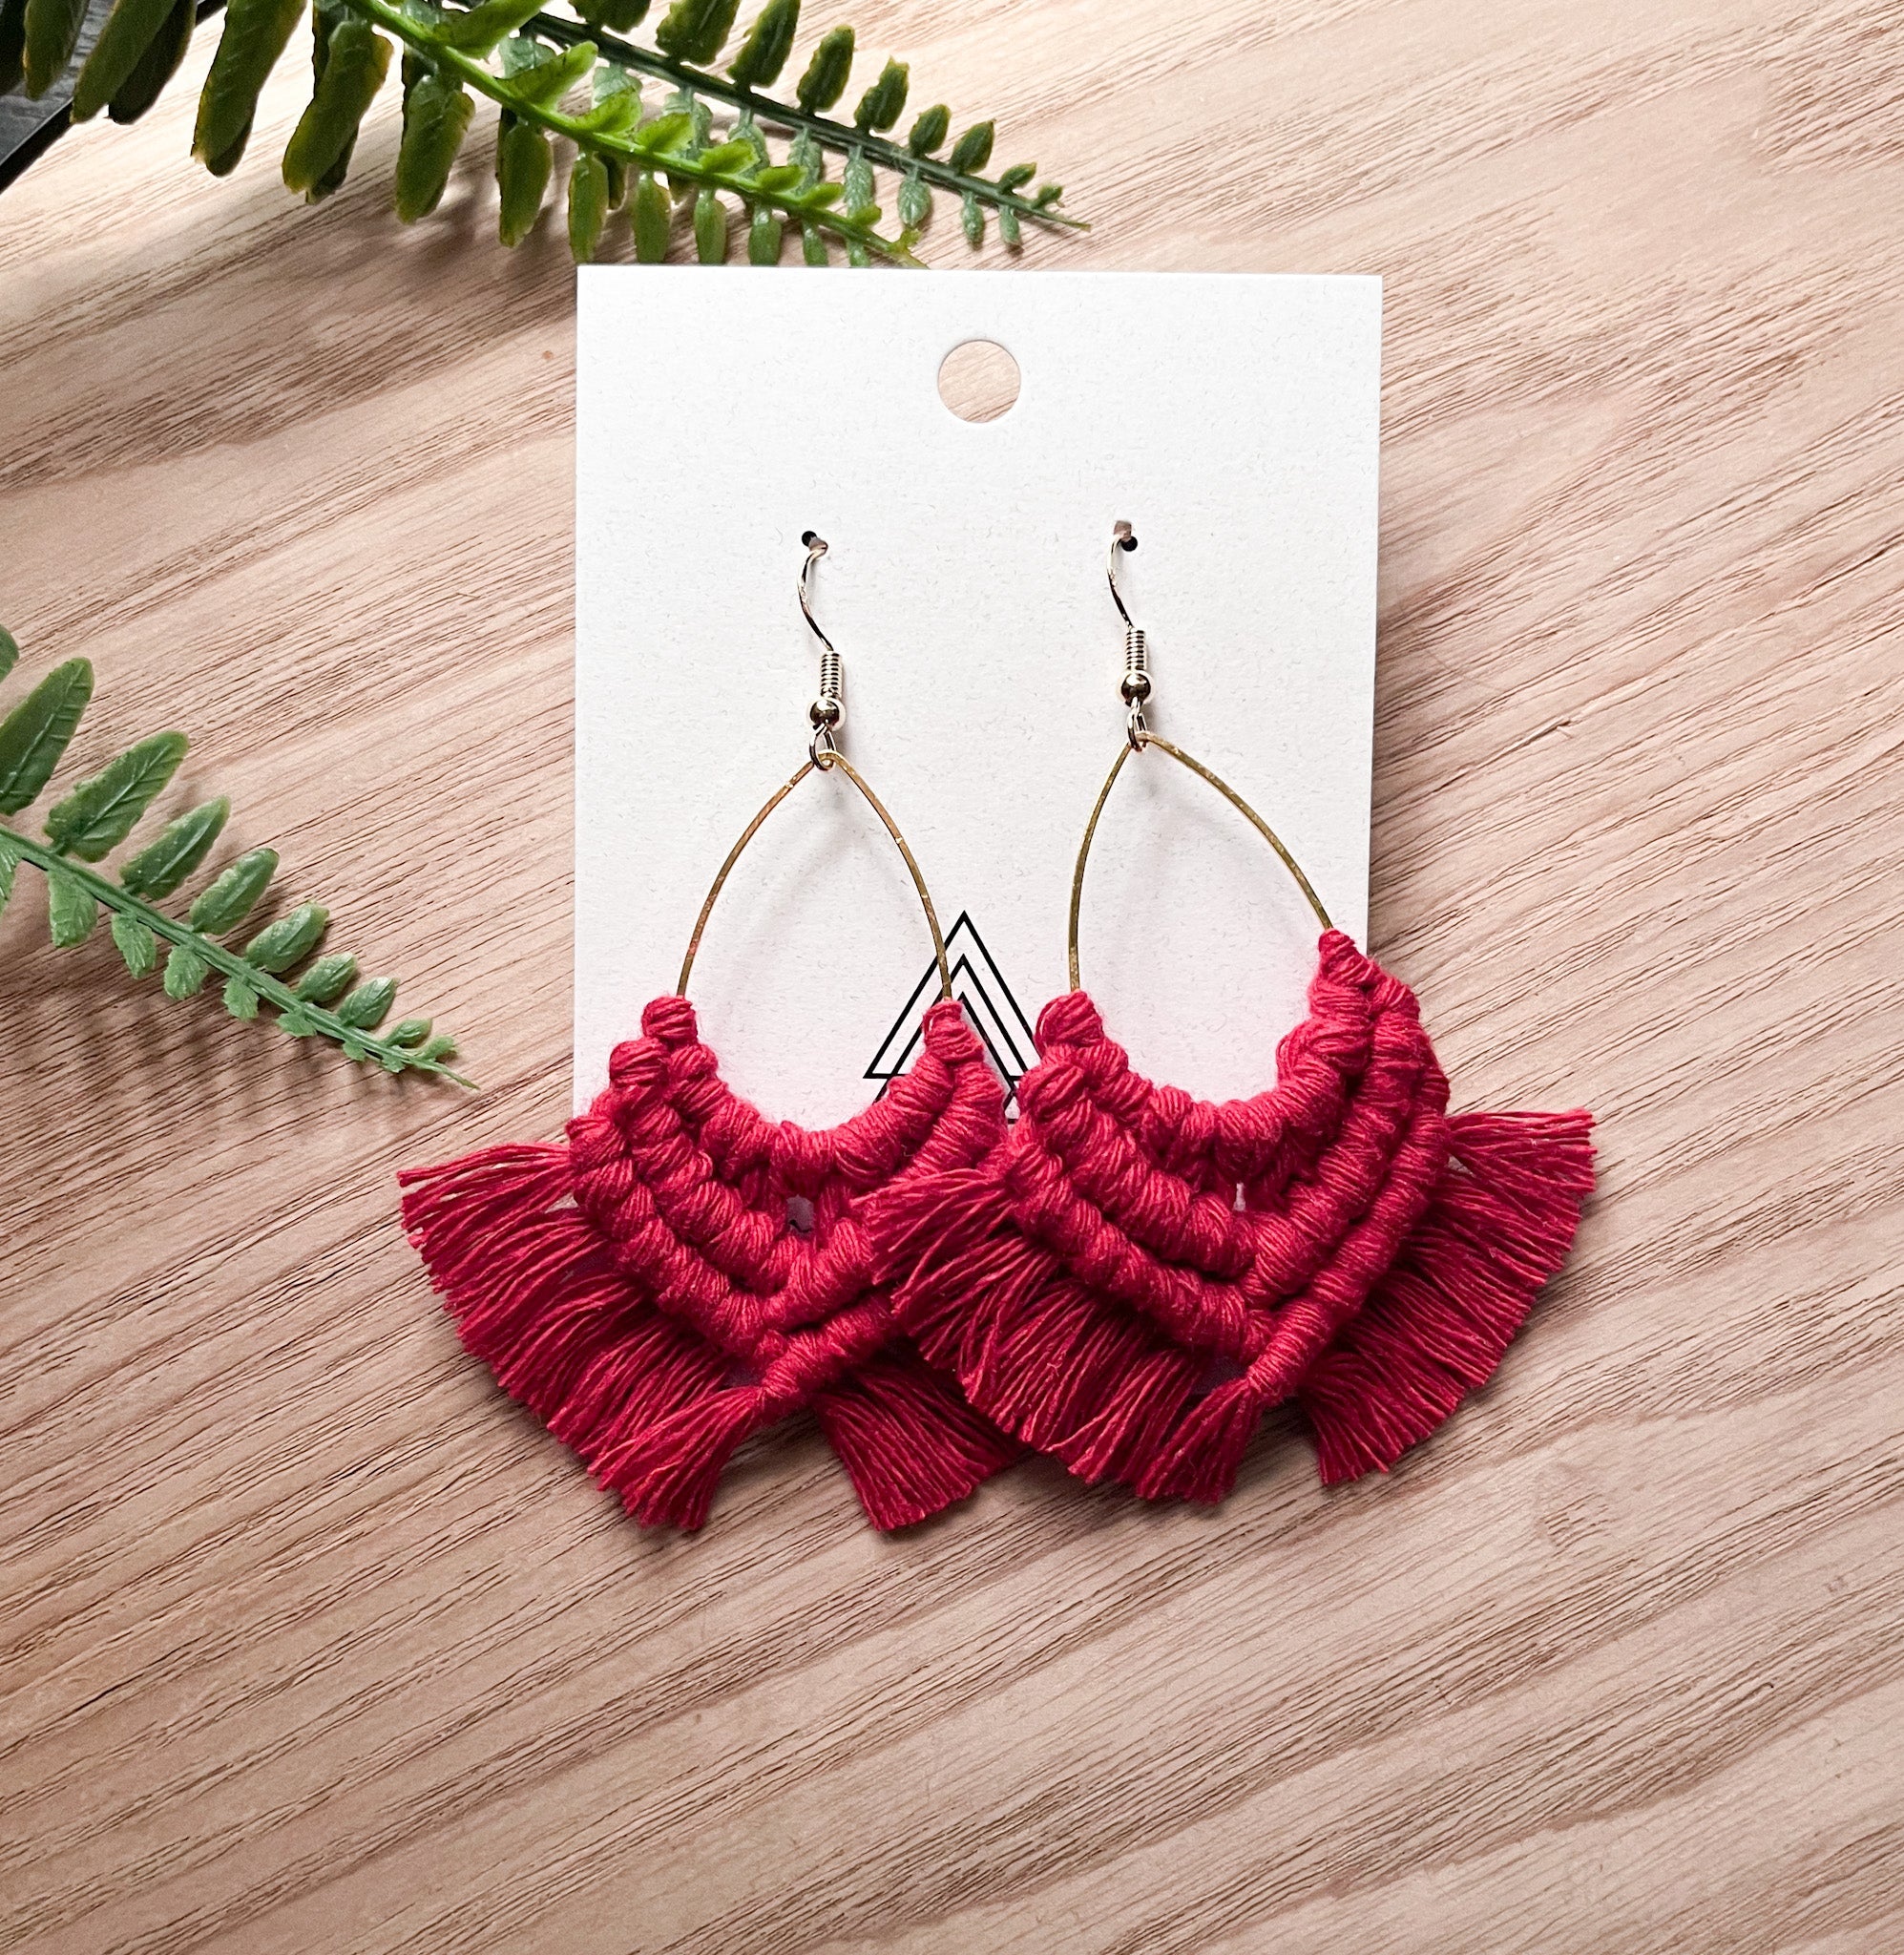 Lightweight Gold and Red Macrame Cotton Plant Hanger - Earrings - Bijou Her -  -  - 